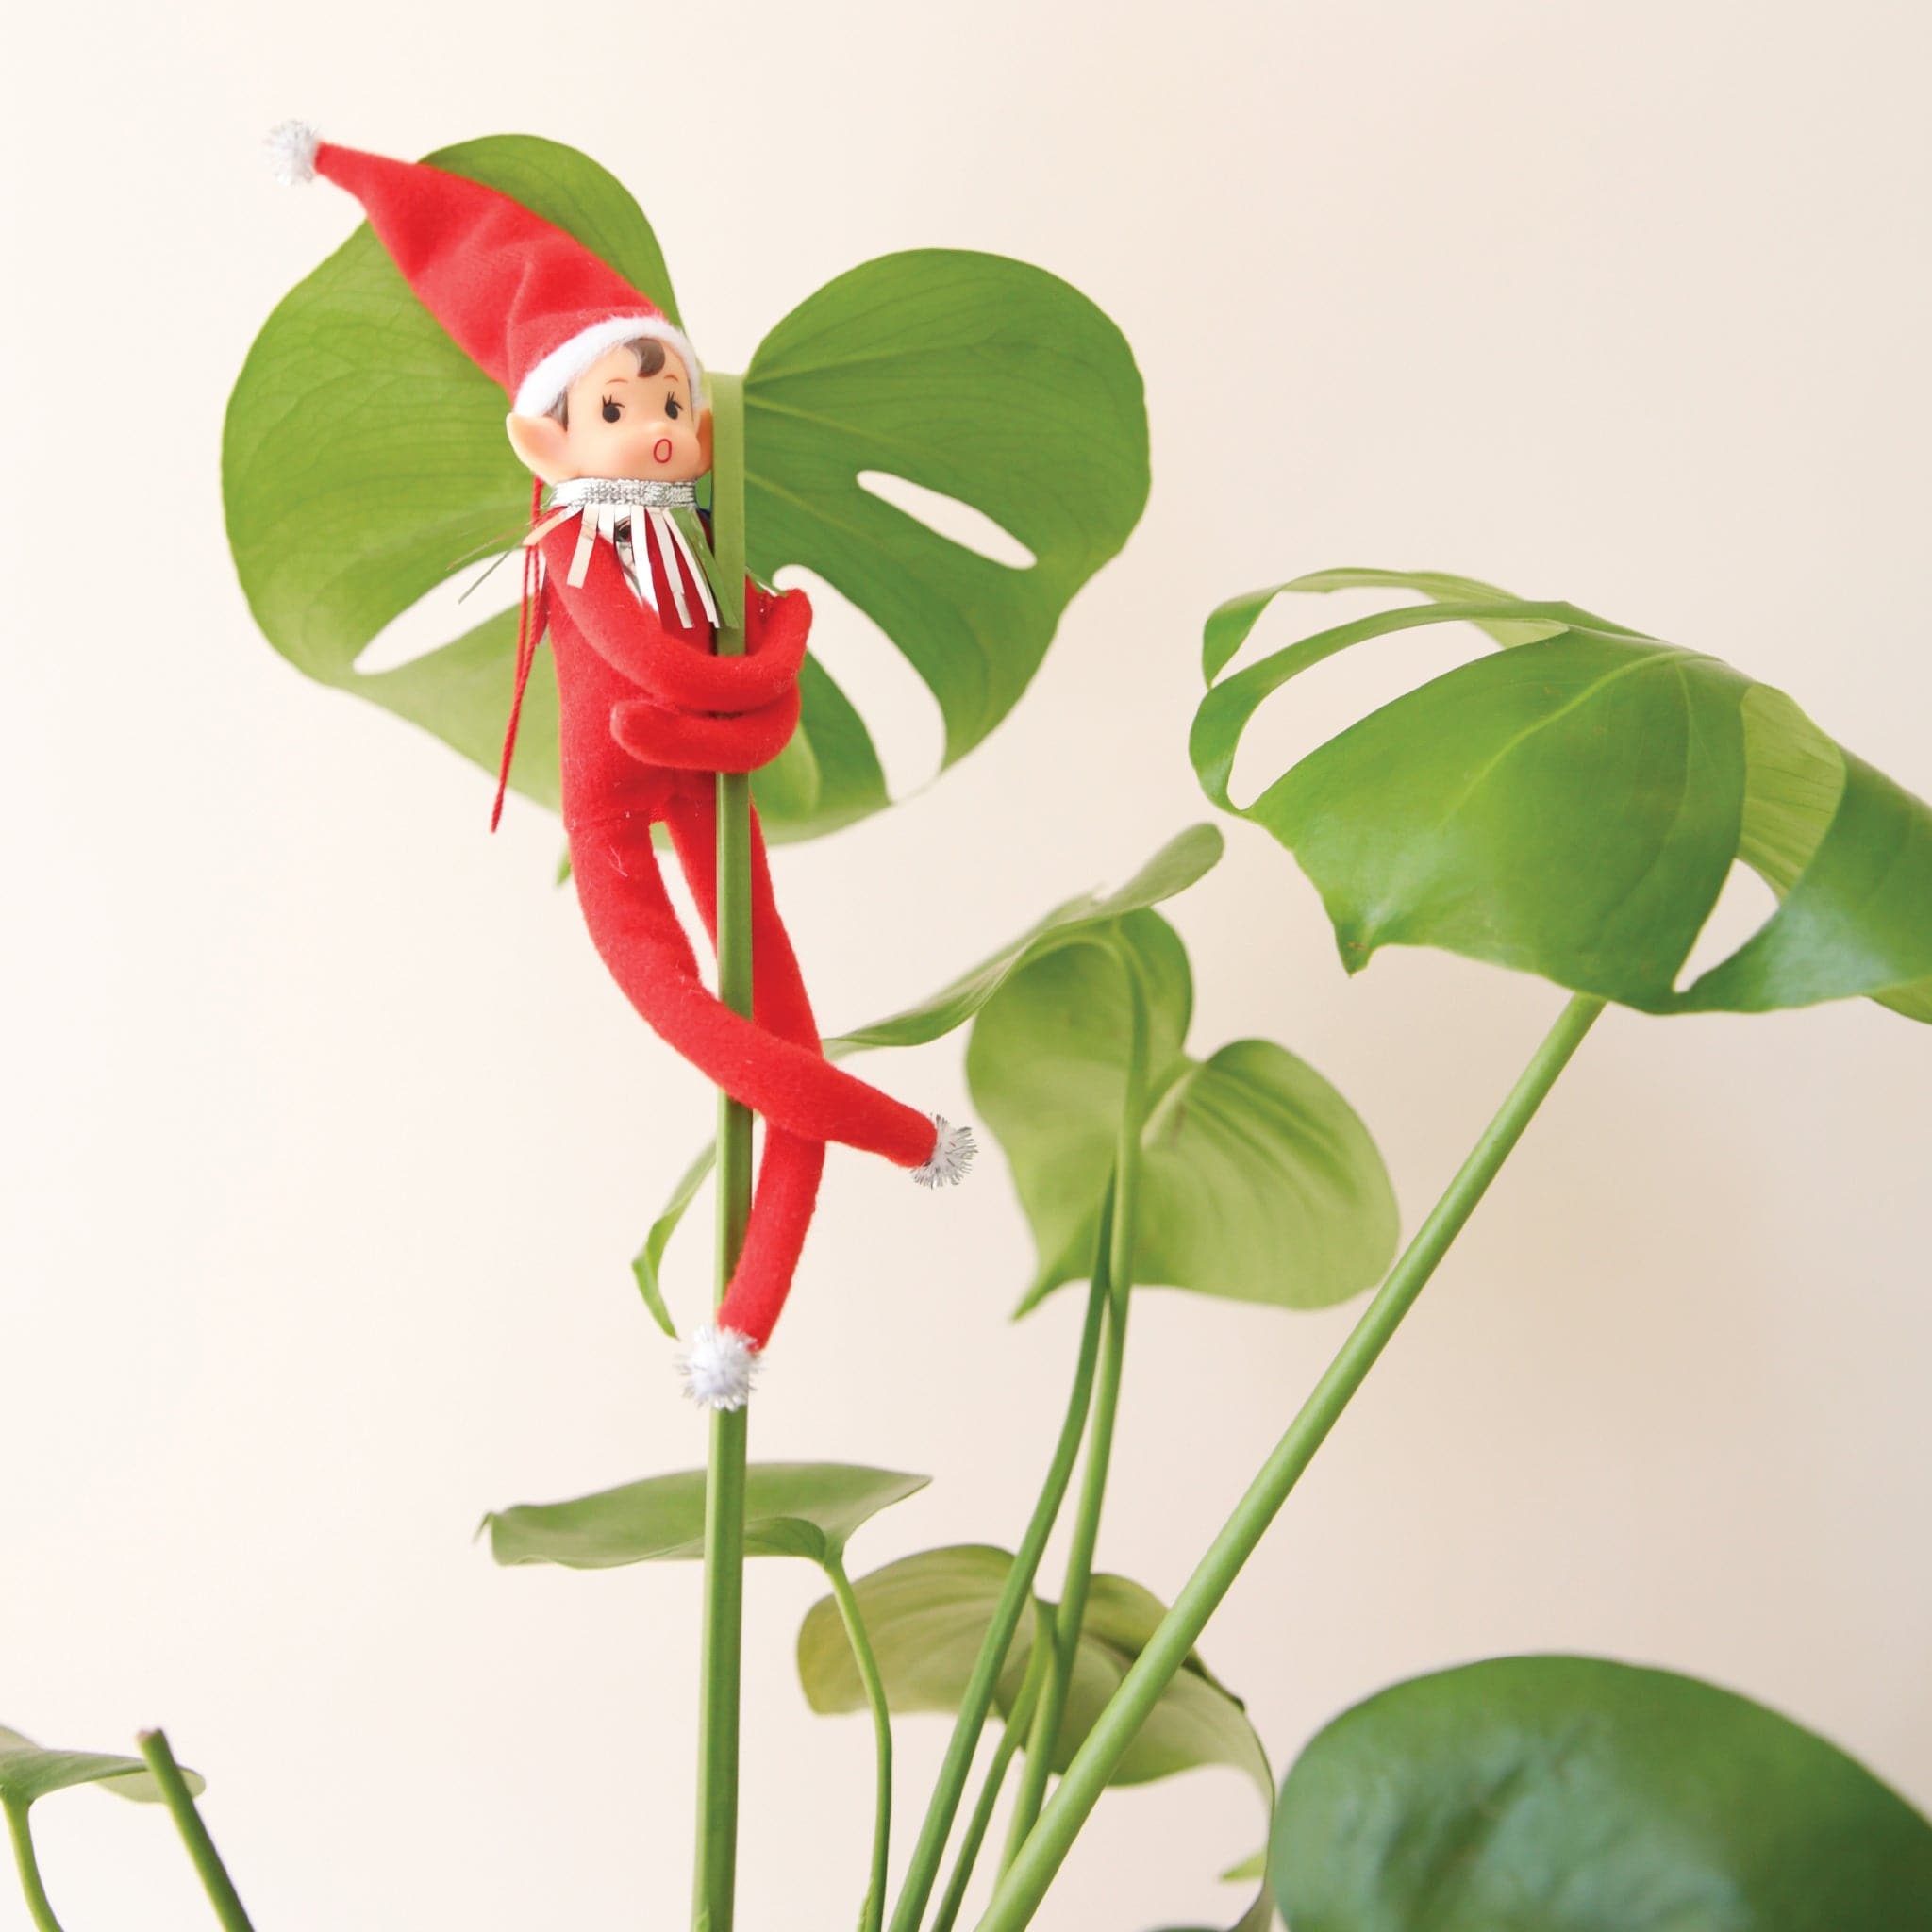 On a cream background is a red elf ornament with bendy arms and legs and a green loop for hanging and is photographed here wrapped around a green house plant. 